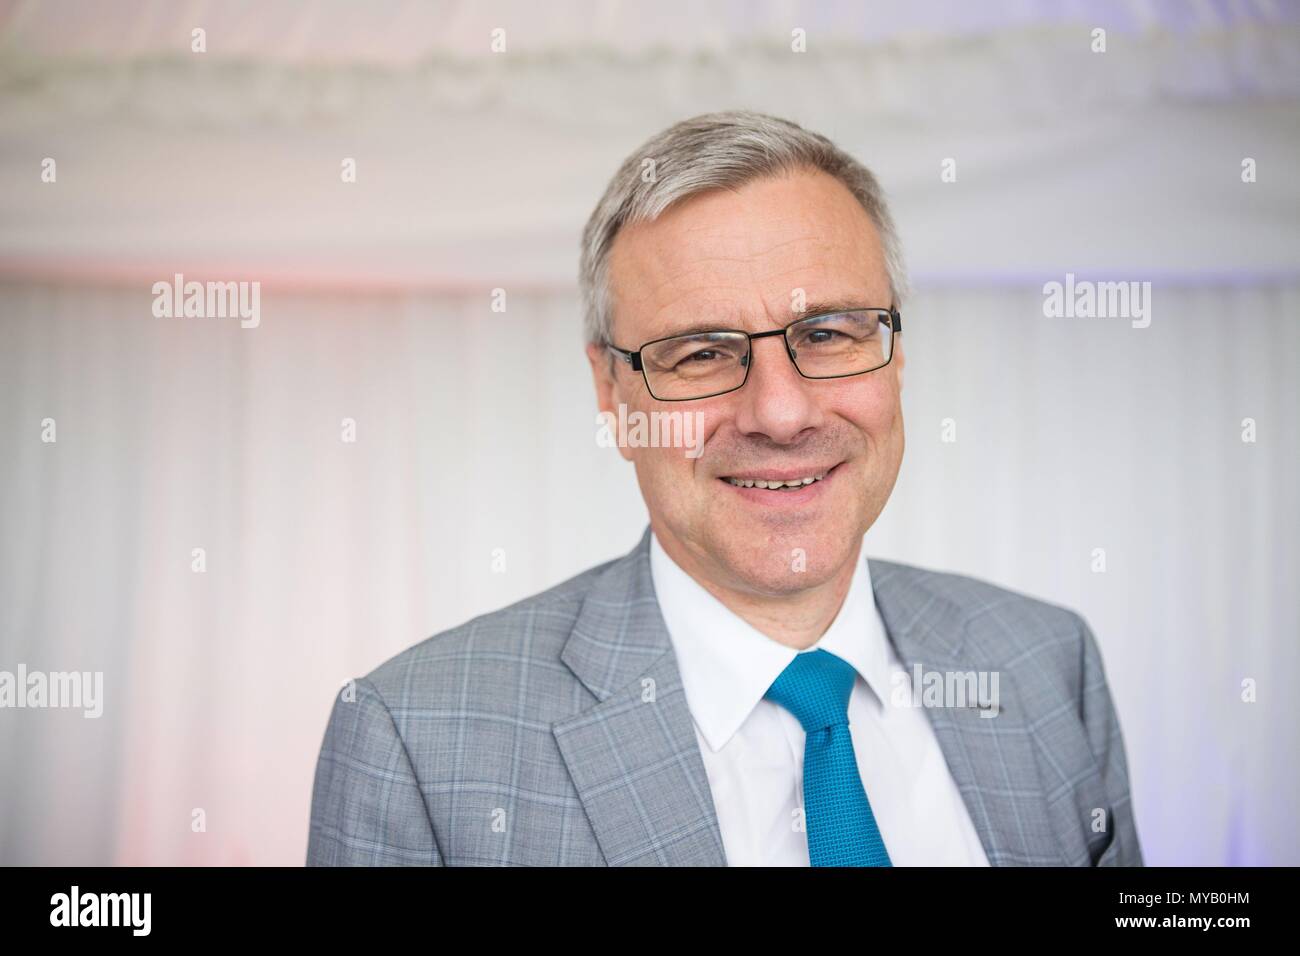 Alain Dehaze, CEO of The Adecco Group, shot at the St. Gallen Symposium  2018, University of St. Gallen, Switzerland, on 4 May 2018. | usage  worldwide Stock Photo - Alamy